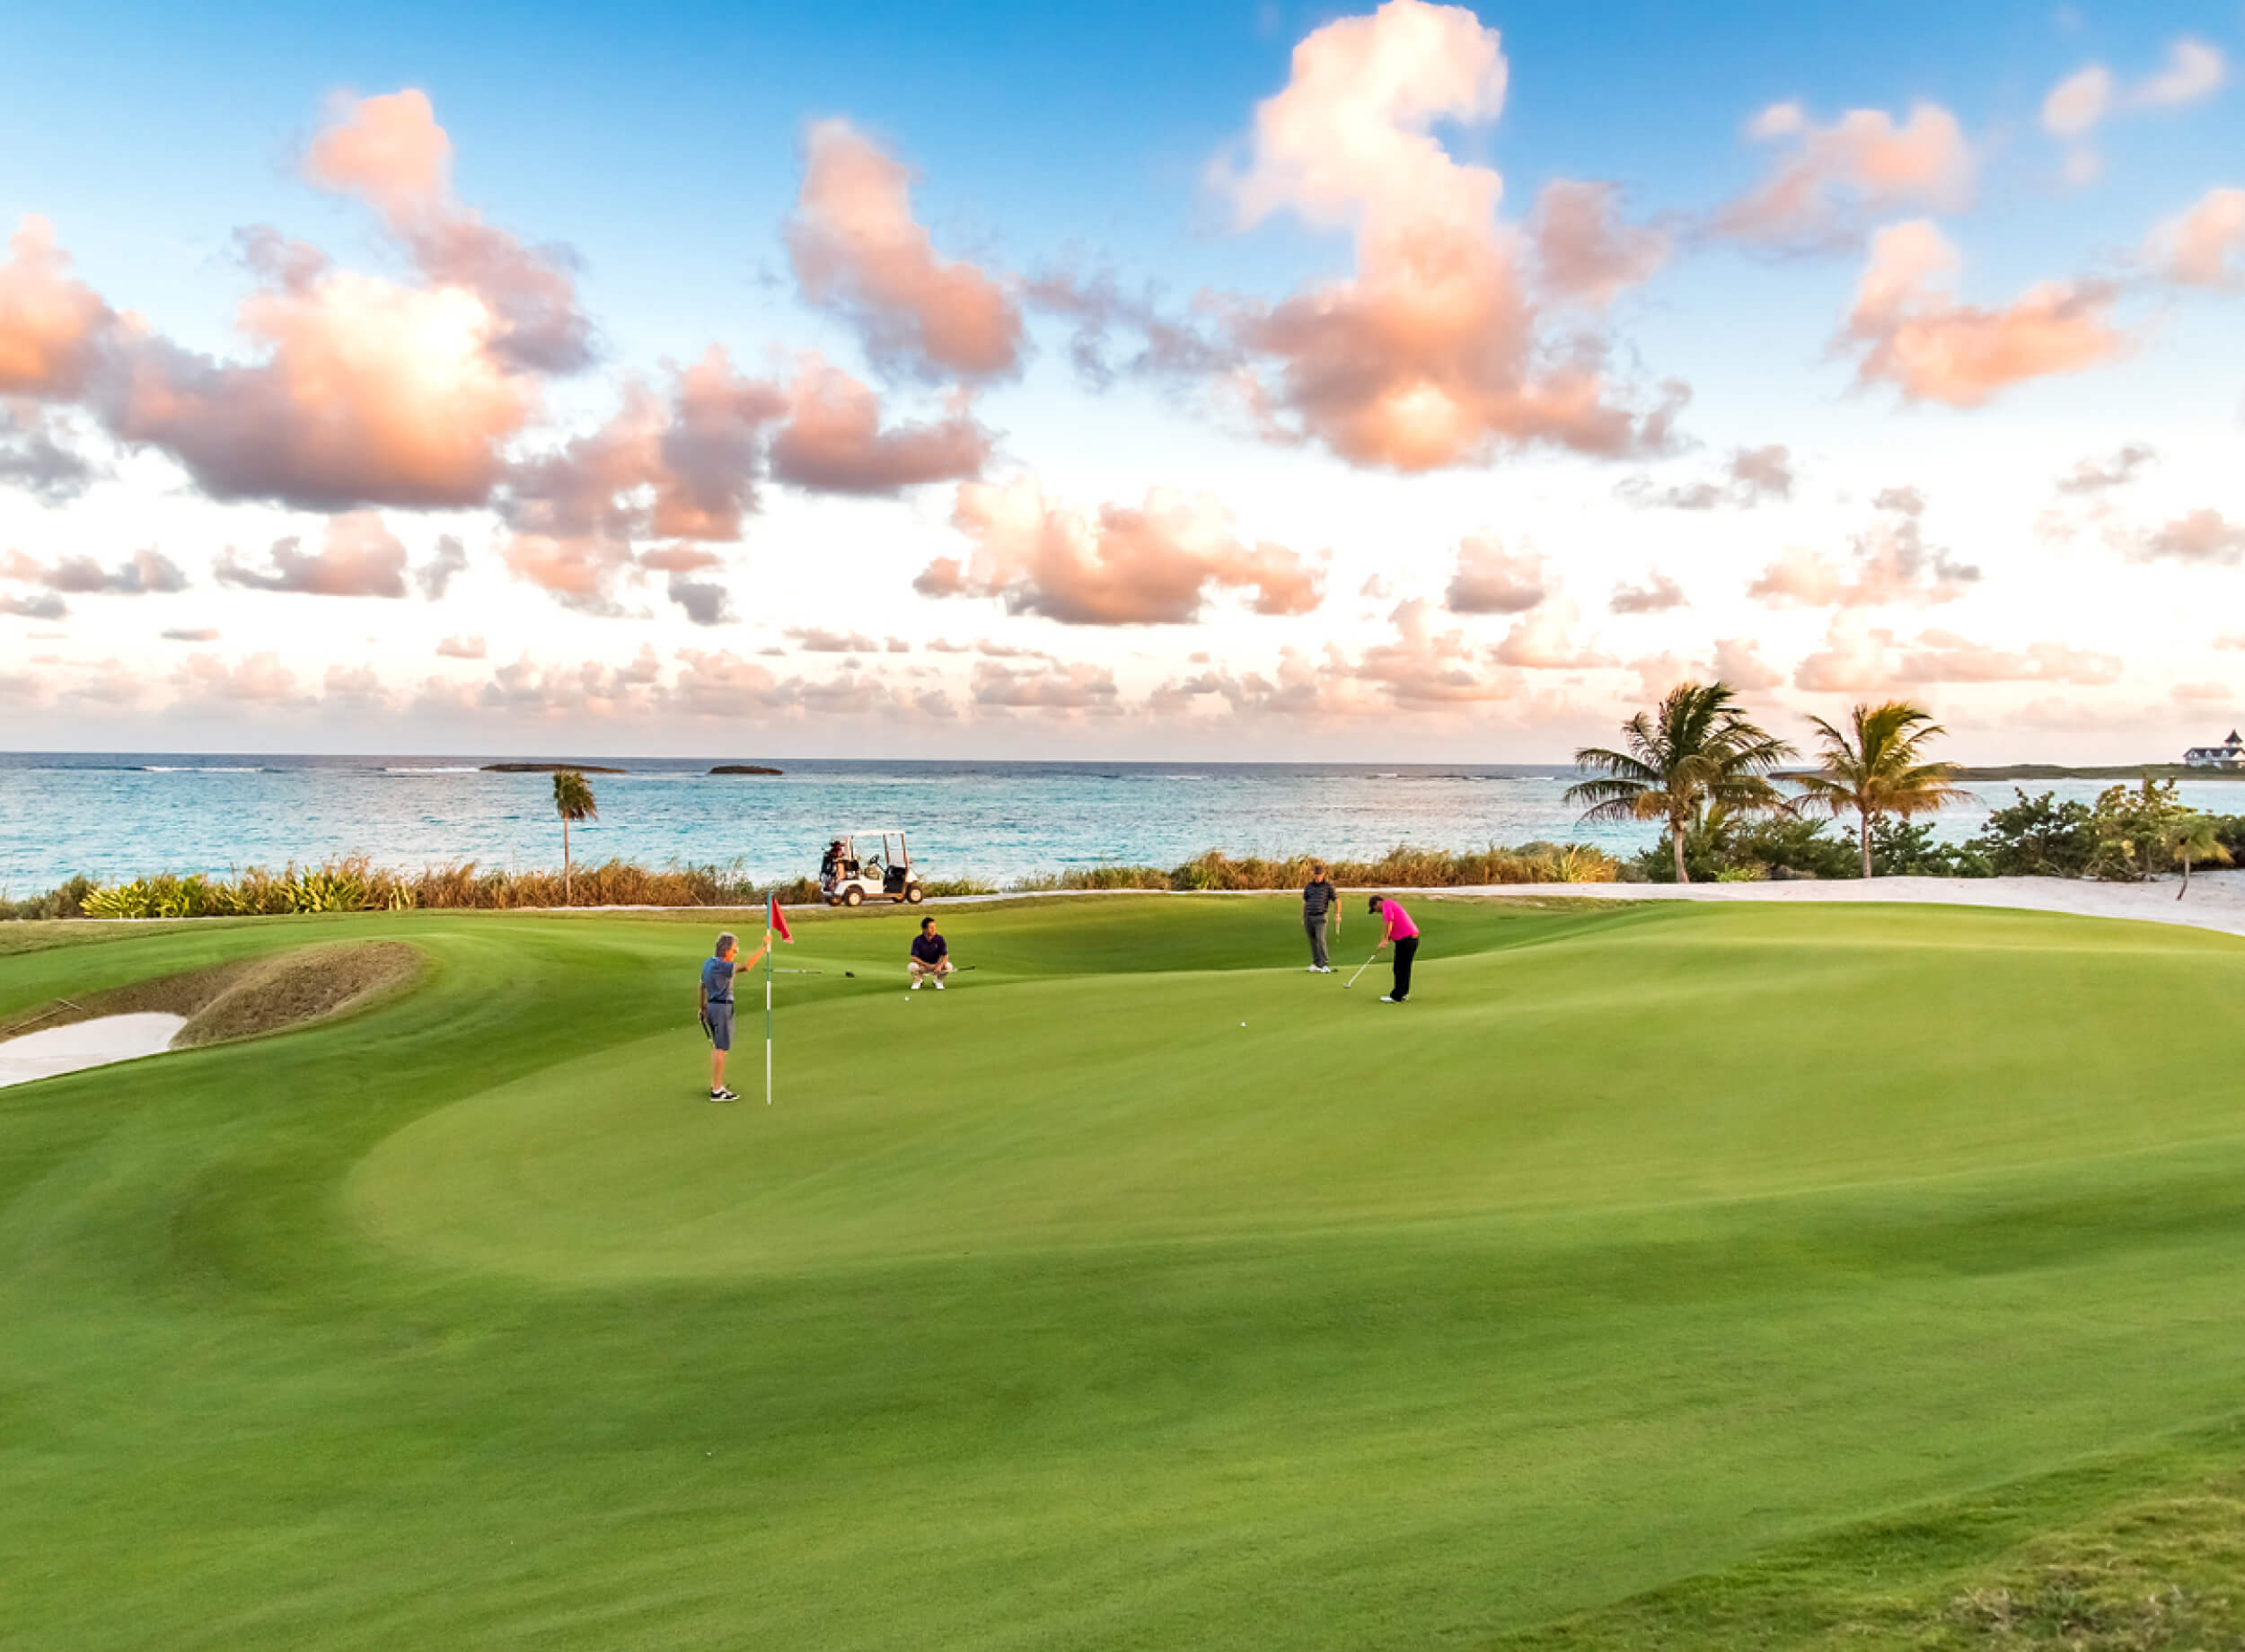 The Abaco Club Golf Course at The Bahamas